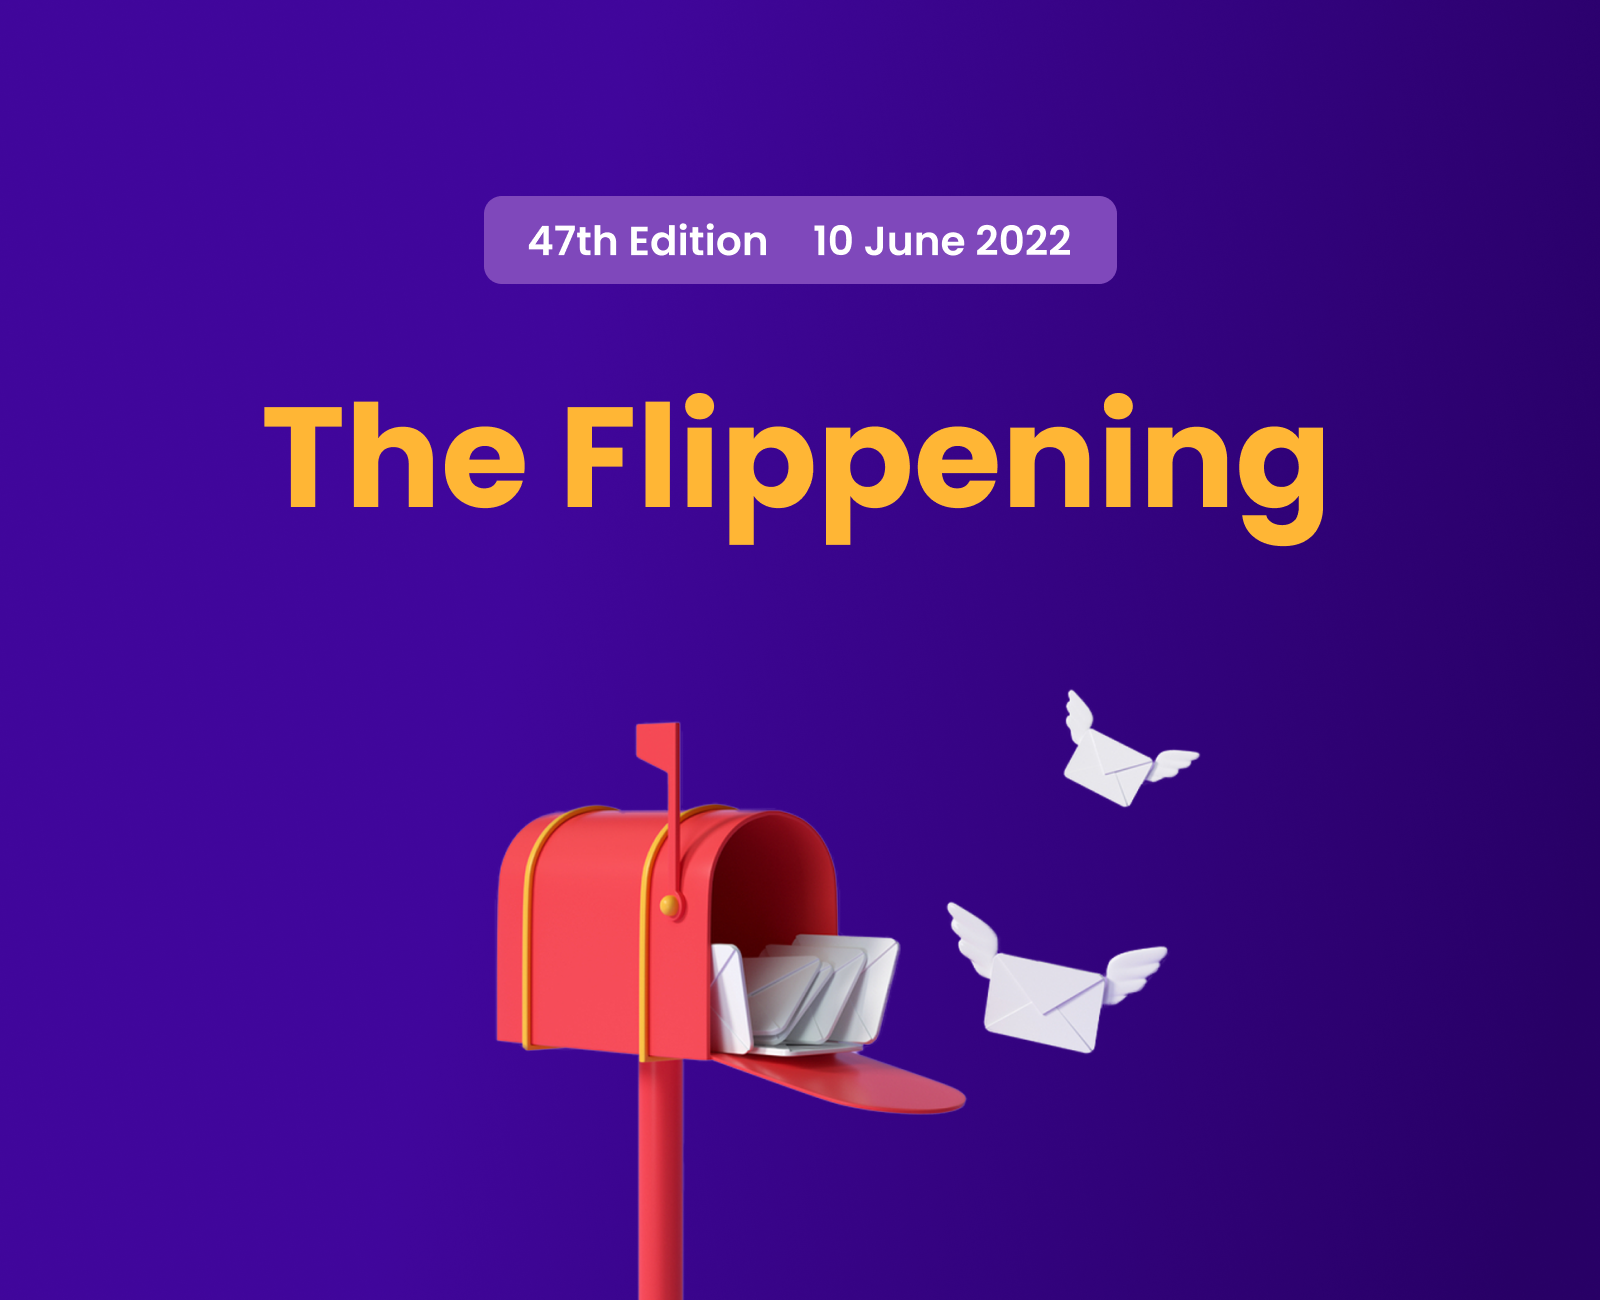 The Flippening by Mudrex